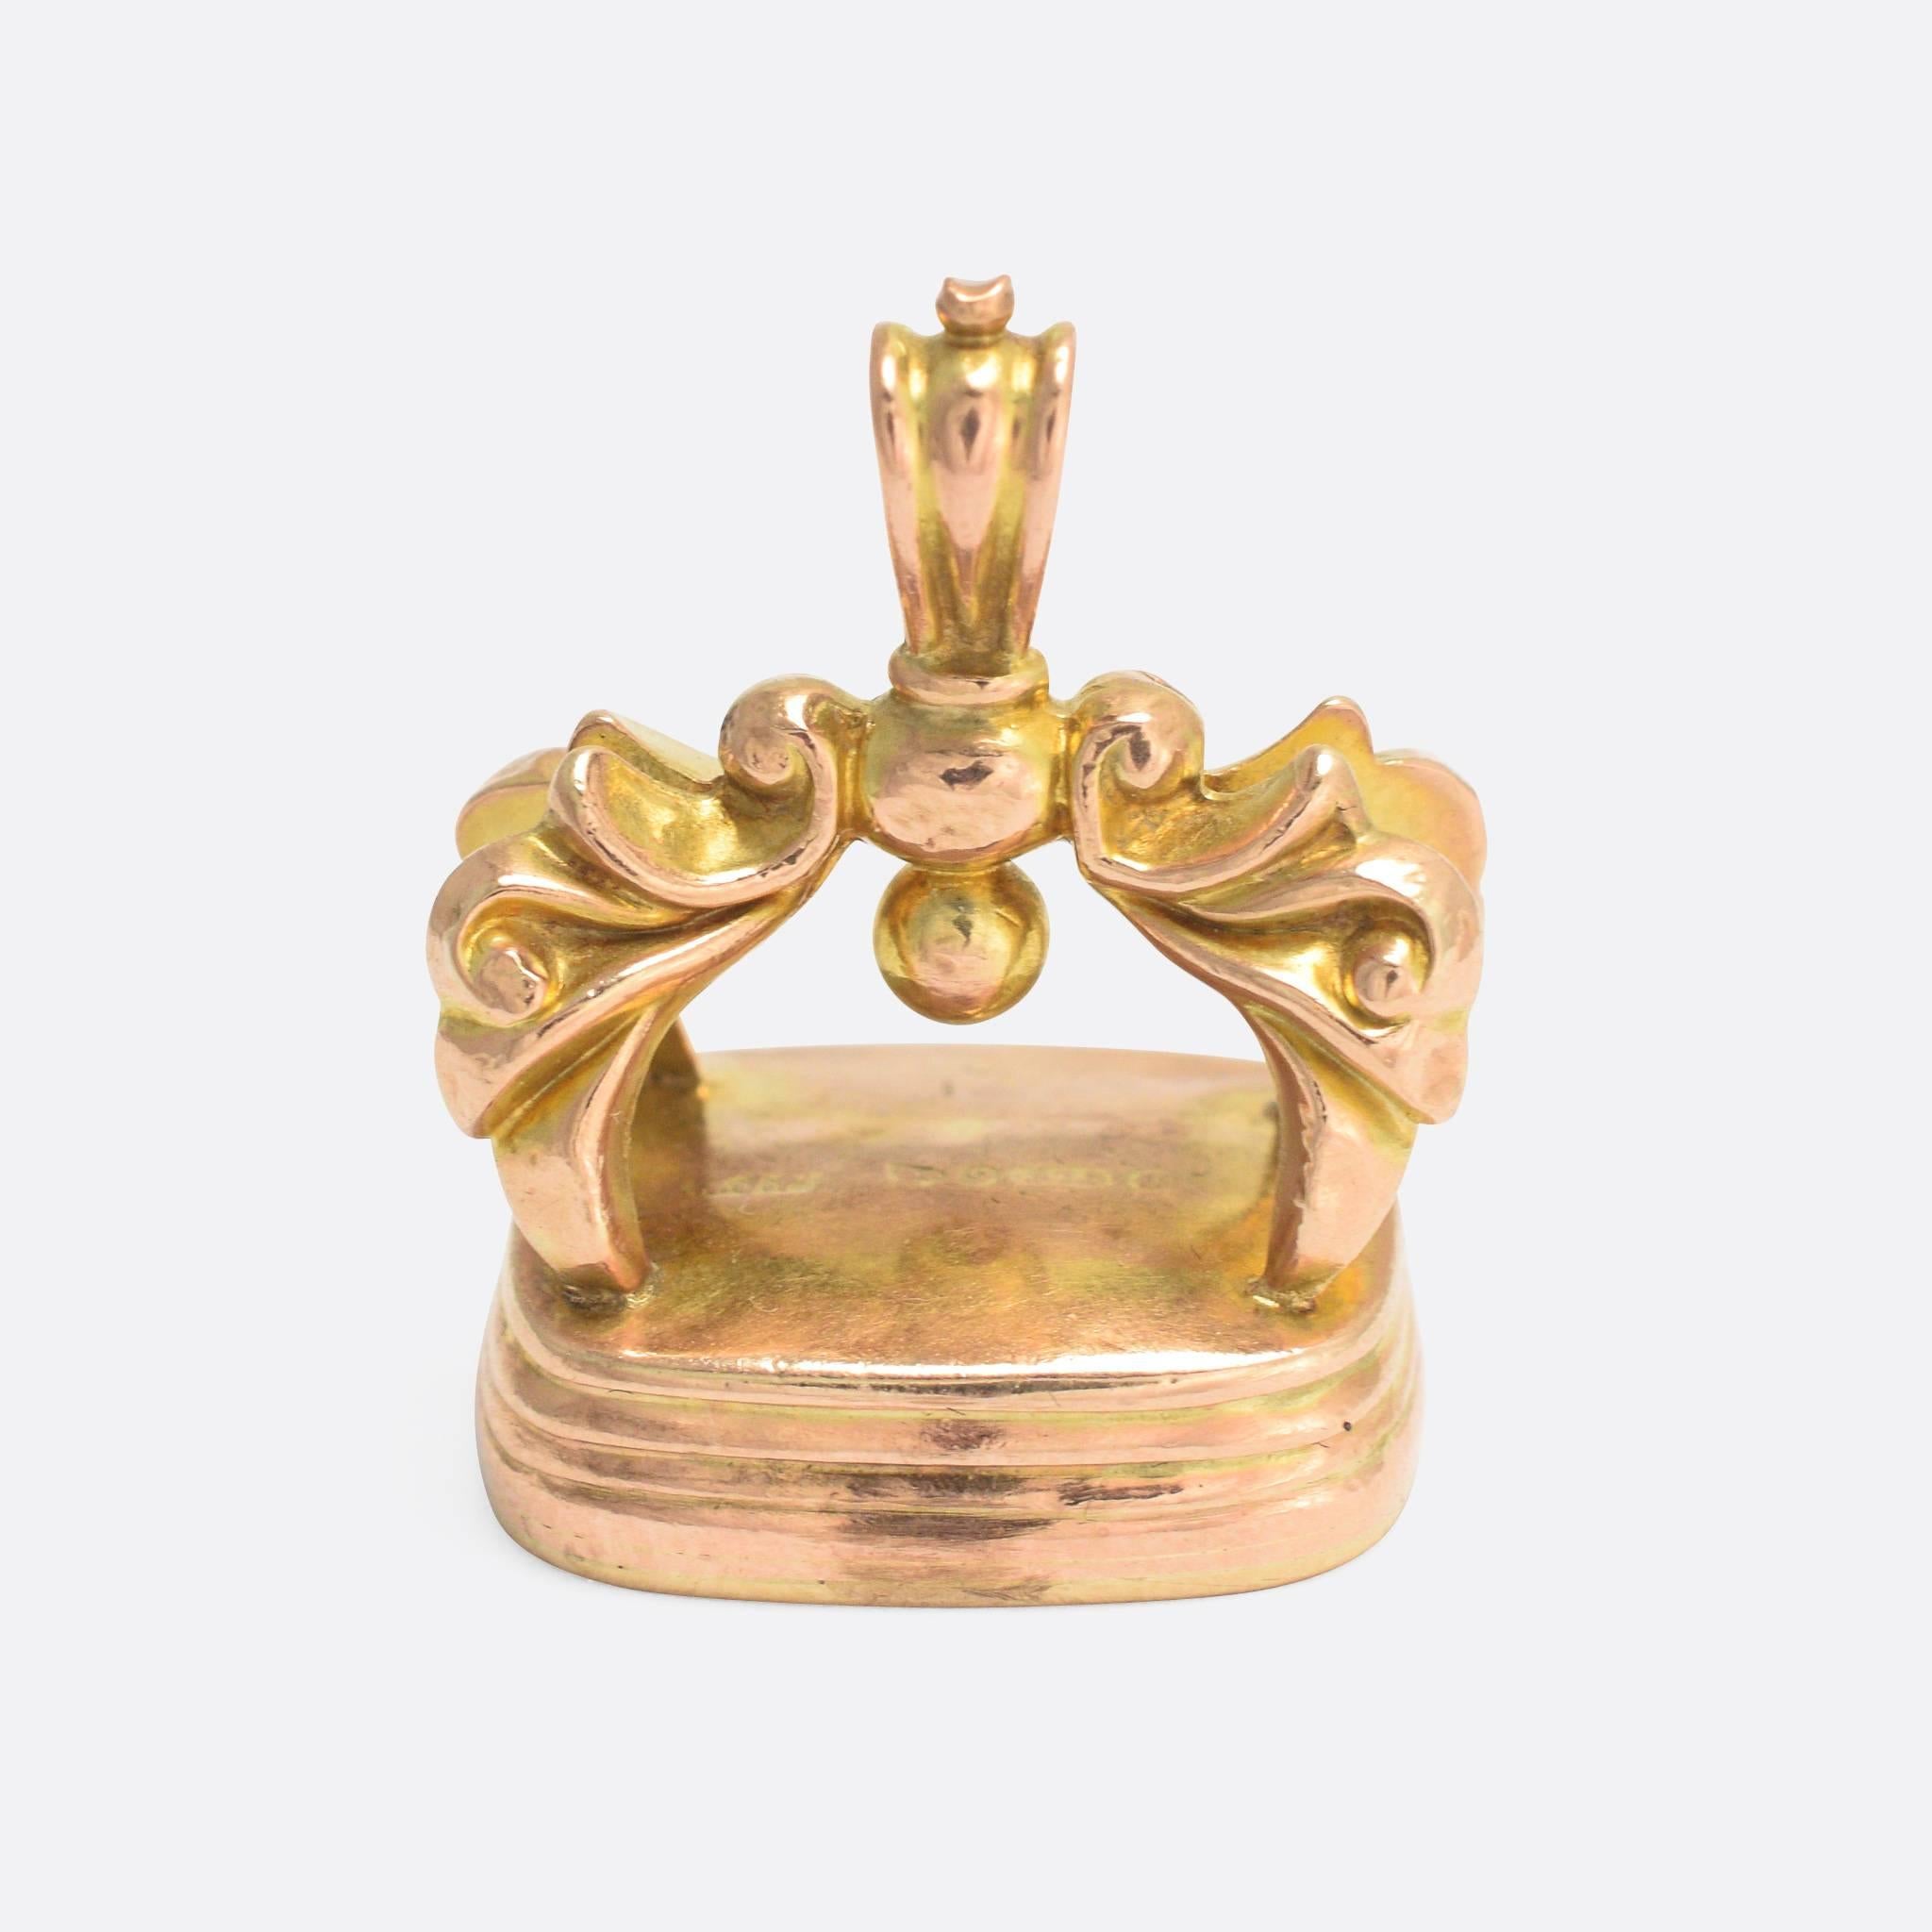 An impressive Victorian seal fob, modelled in 9k rose gold and dating to 1886. It's a good big size, and the base has been carved with a shield-shaped armorial crest. The frame features lavish foliate detailing, very typical of the mid-Victorian